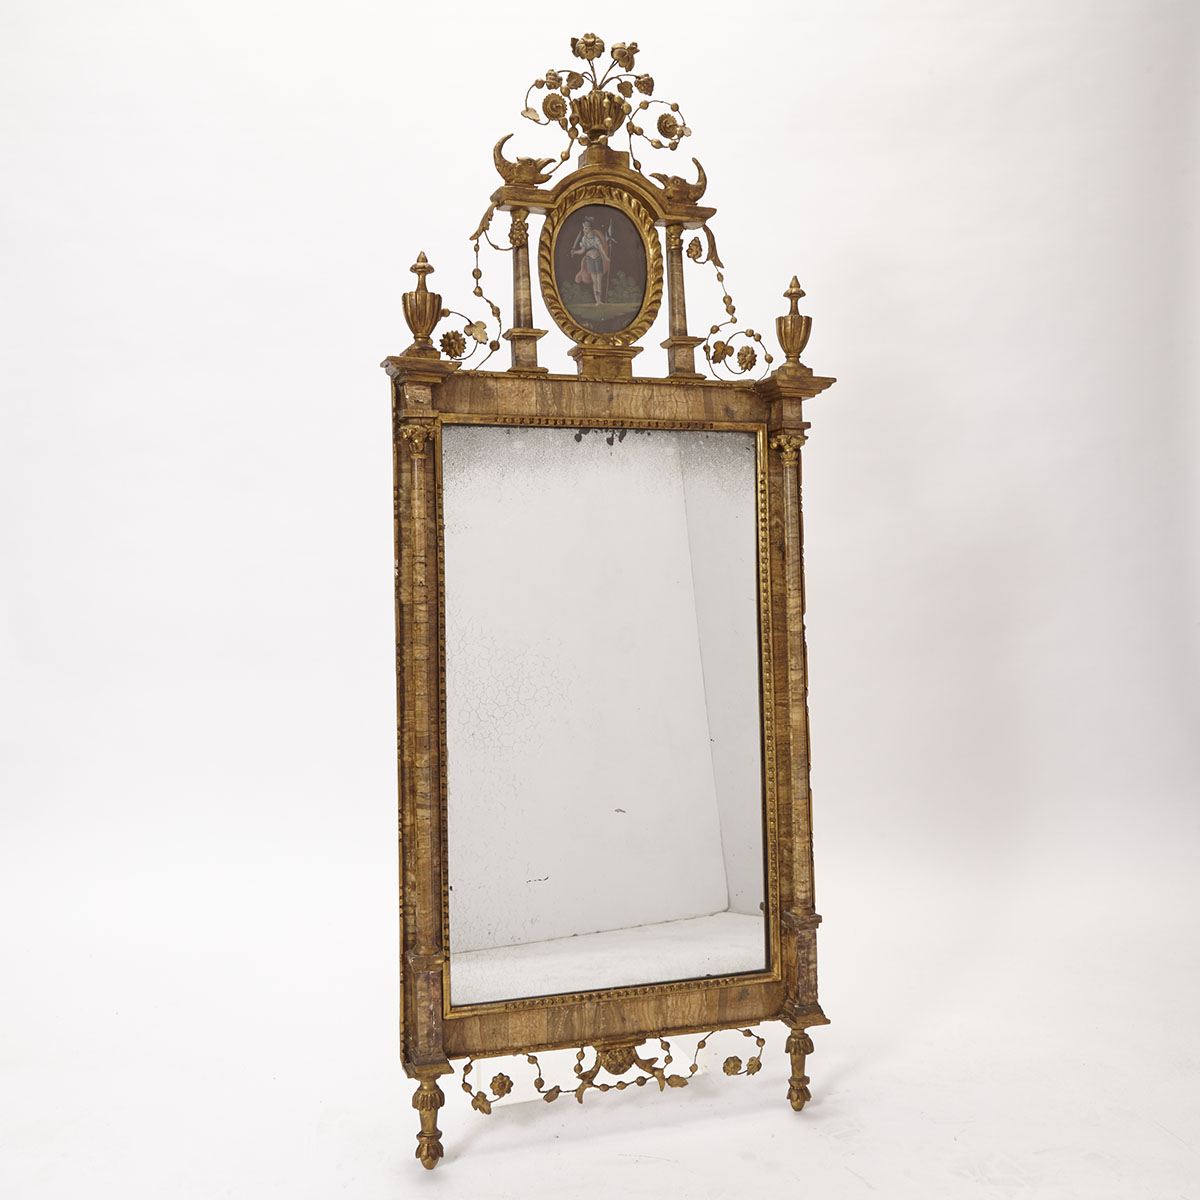 Spanish Neoclassical Marble Mounted Giltwood Mirror, Bilbao, late 18th/early 19th century